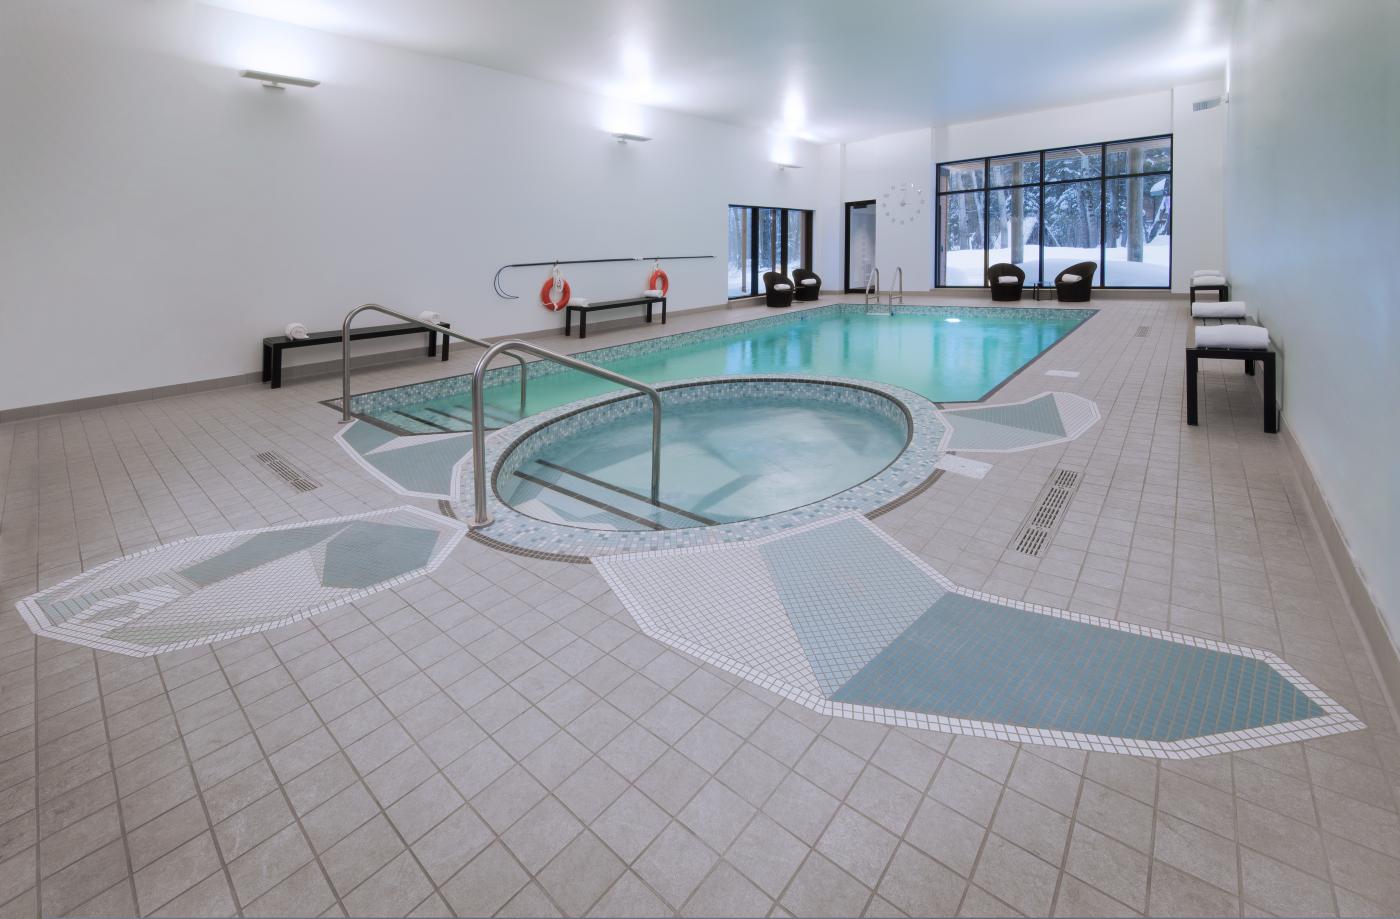 Hôtel-Musée Premières Nations - Indoor swimming pool and fitness room